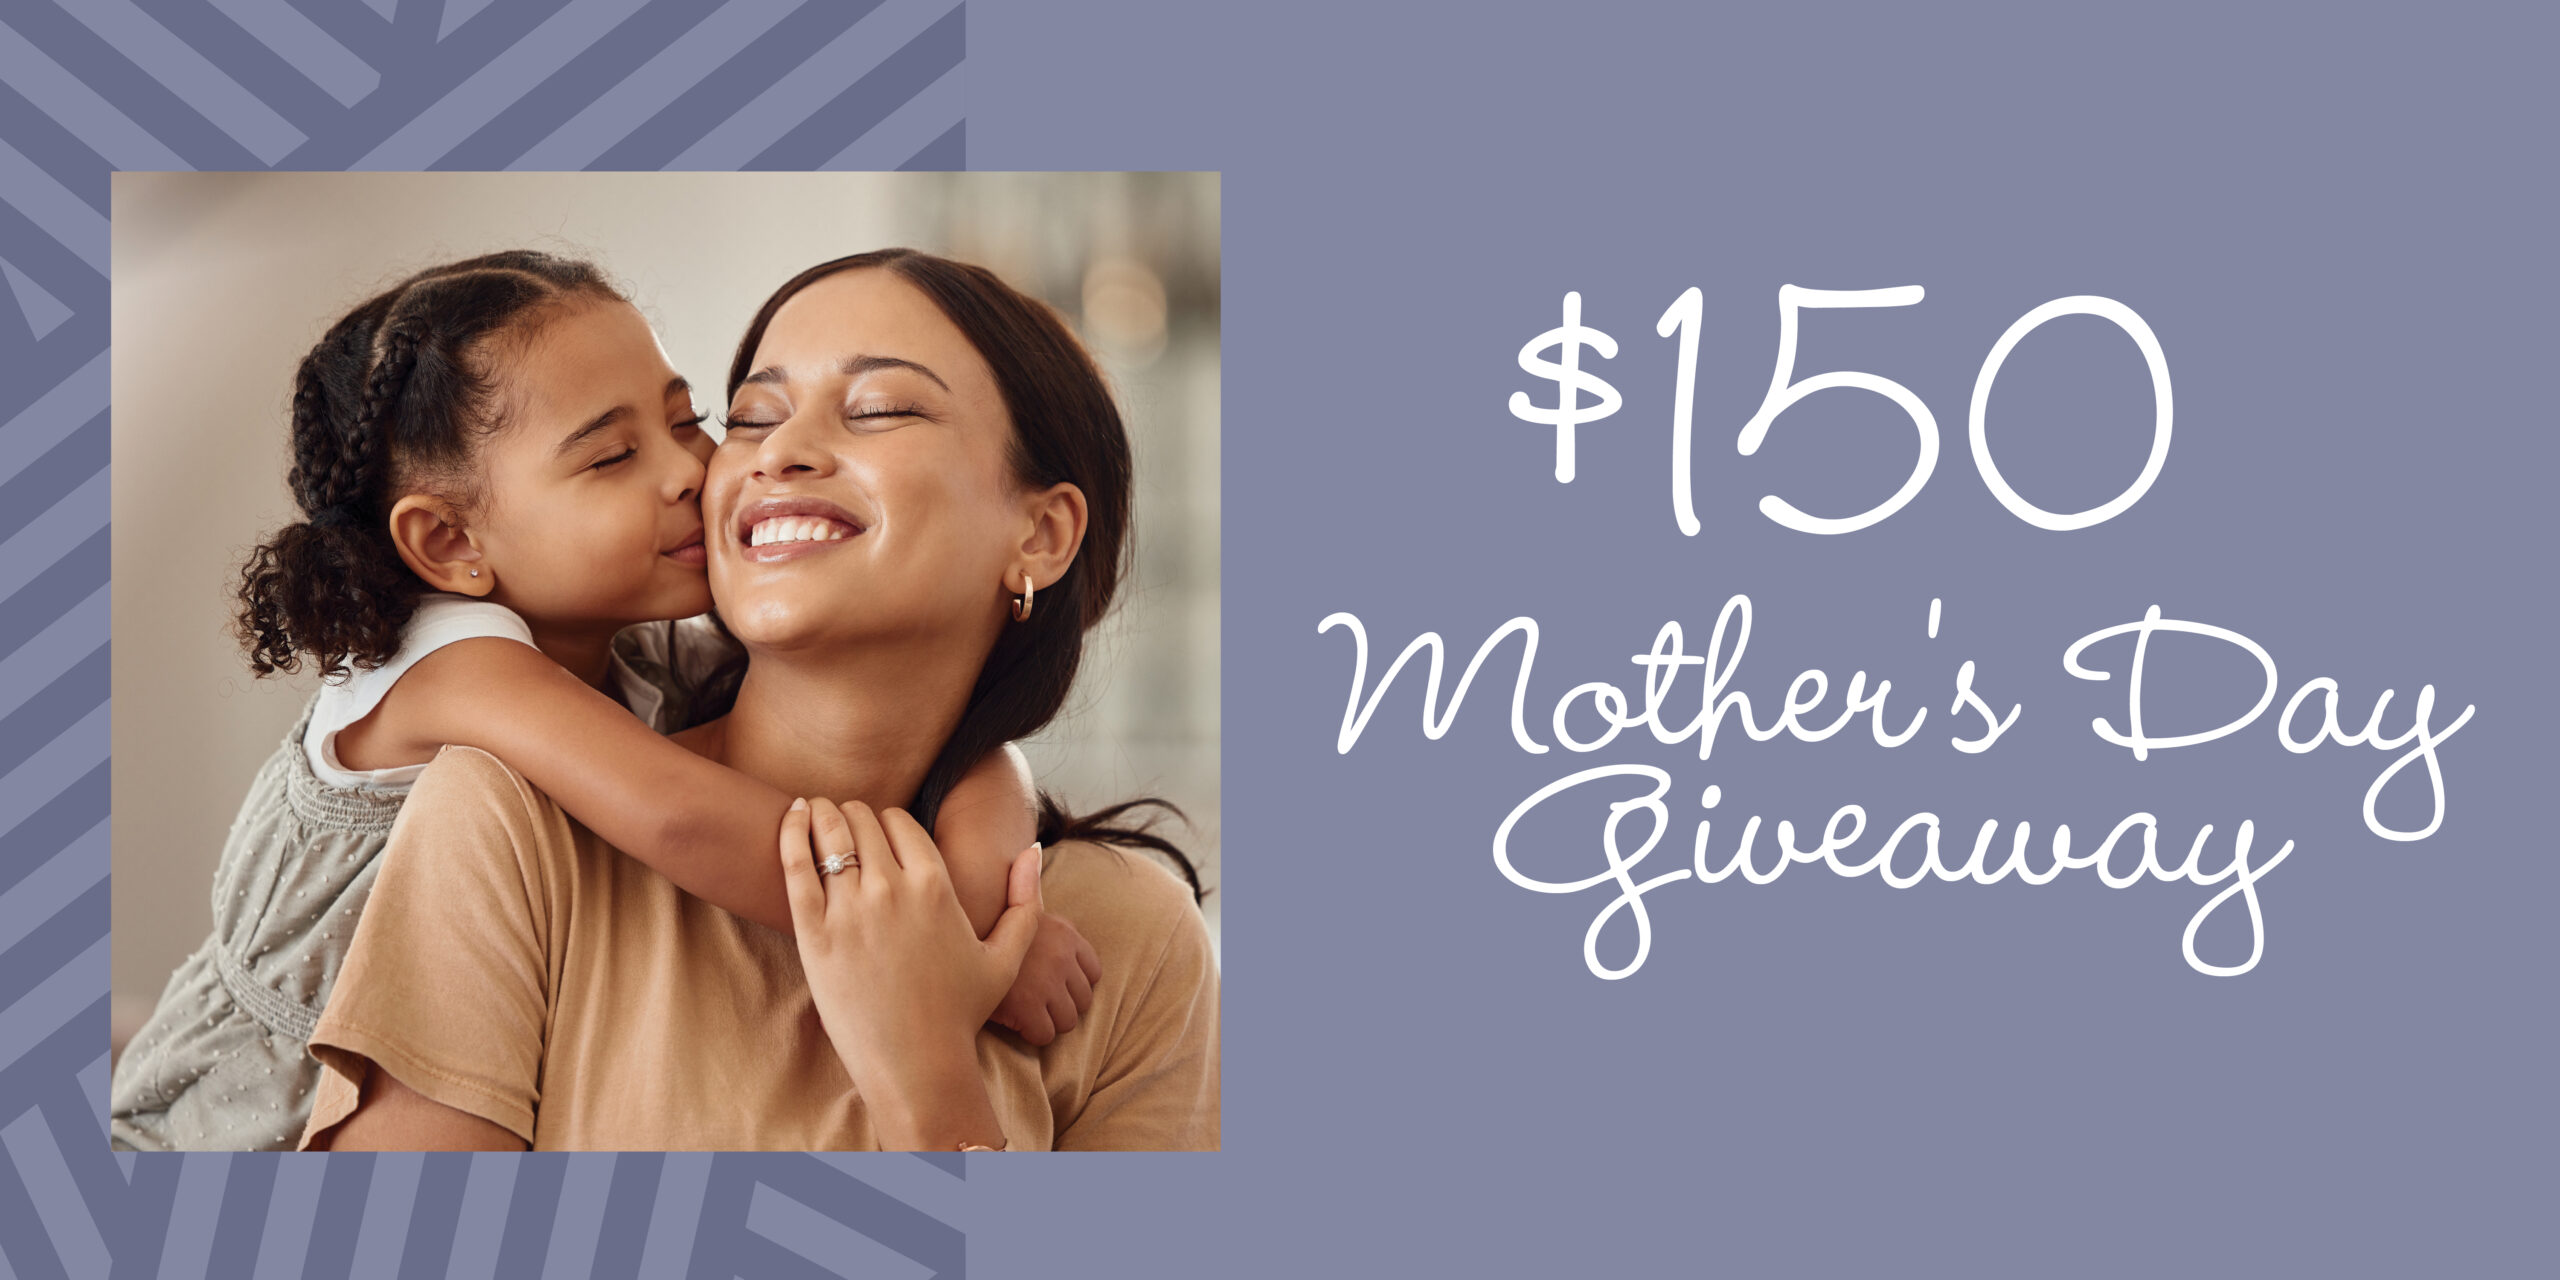 $150 Mother's Day Giveaway